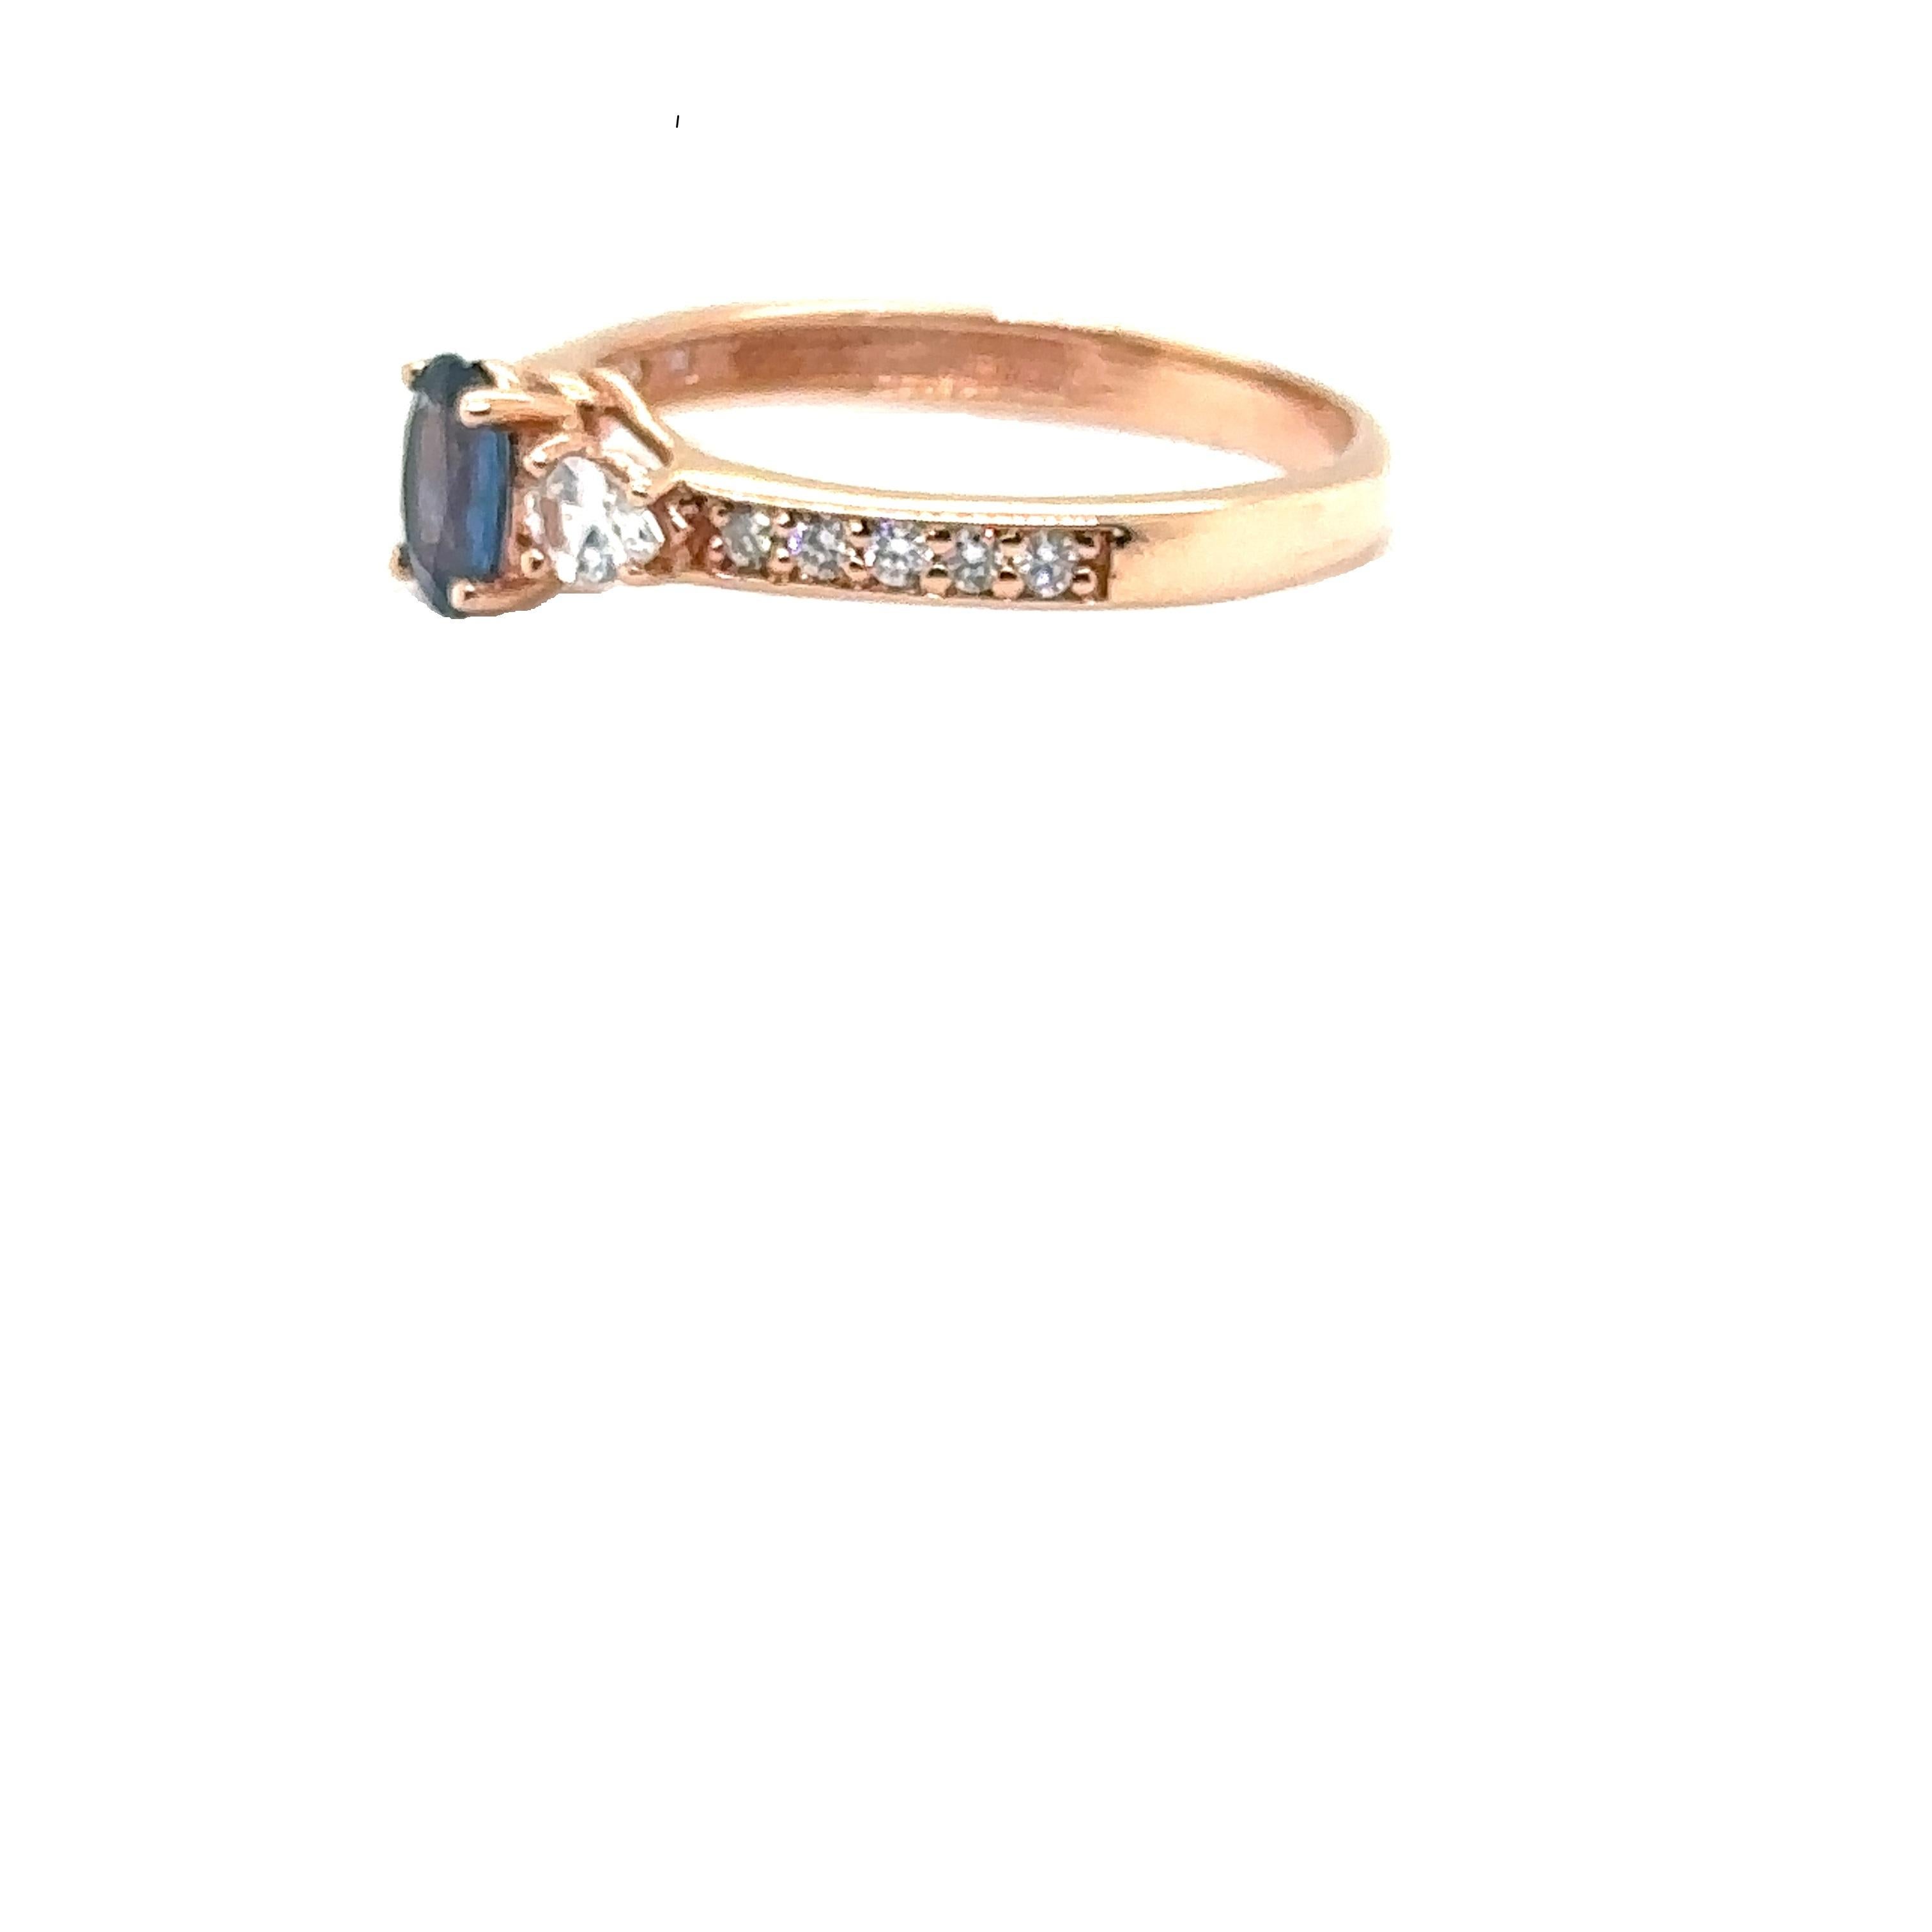 JAS-21-2240 - 14K ROSE GOLD OVAL SAPPHIRE RING with WHITE SAPPHIRES & DIAMONDS For Sale 5